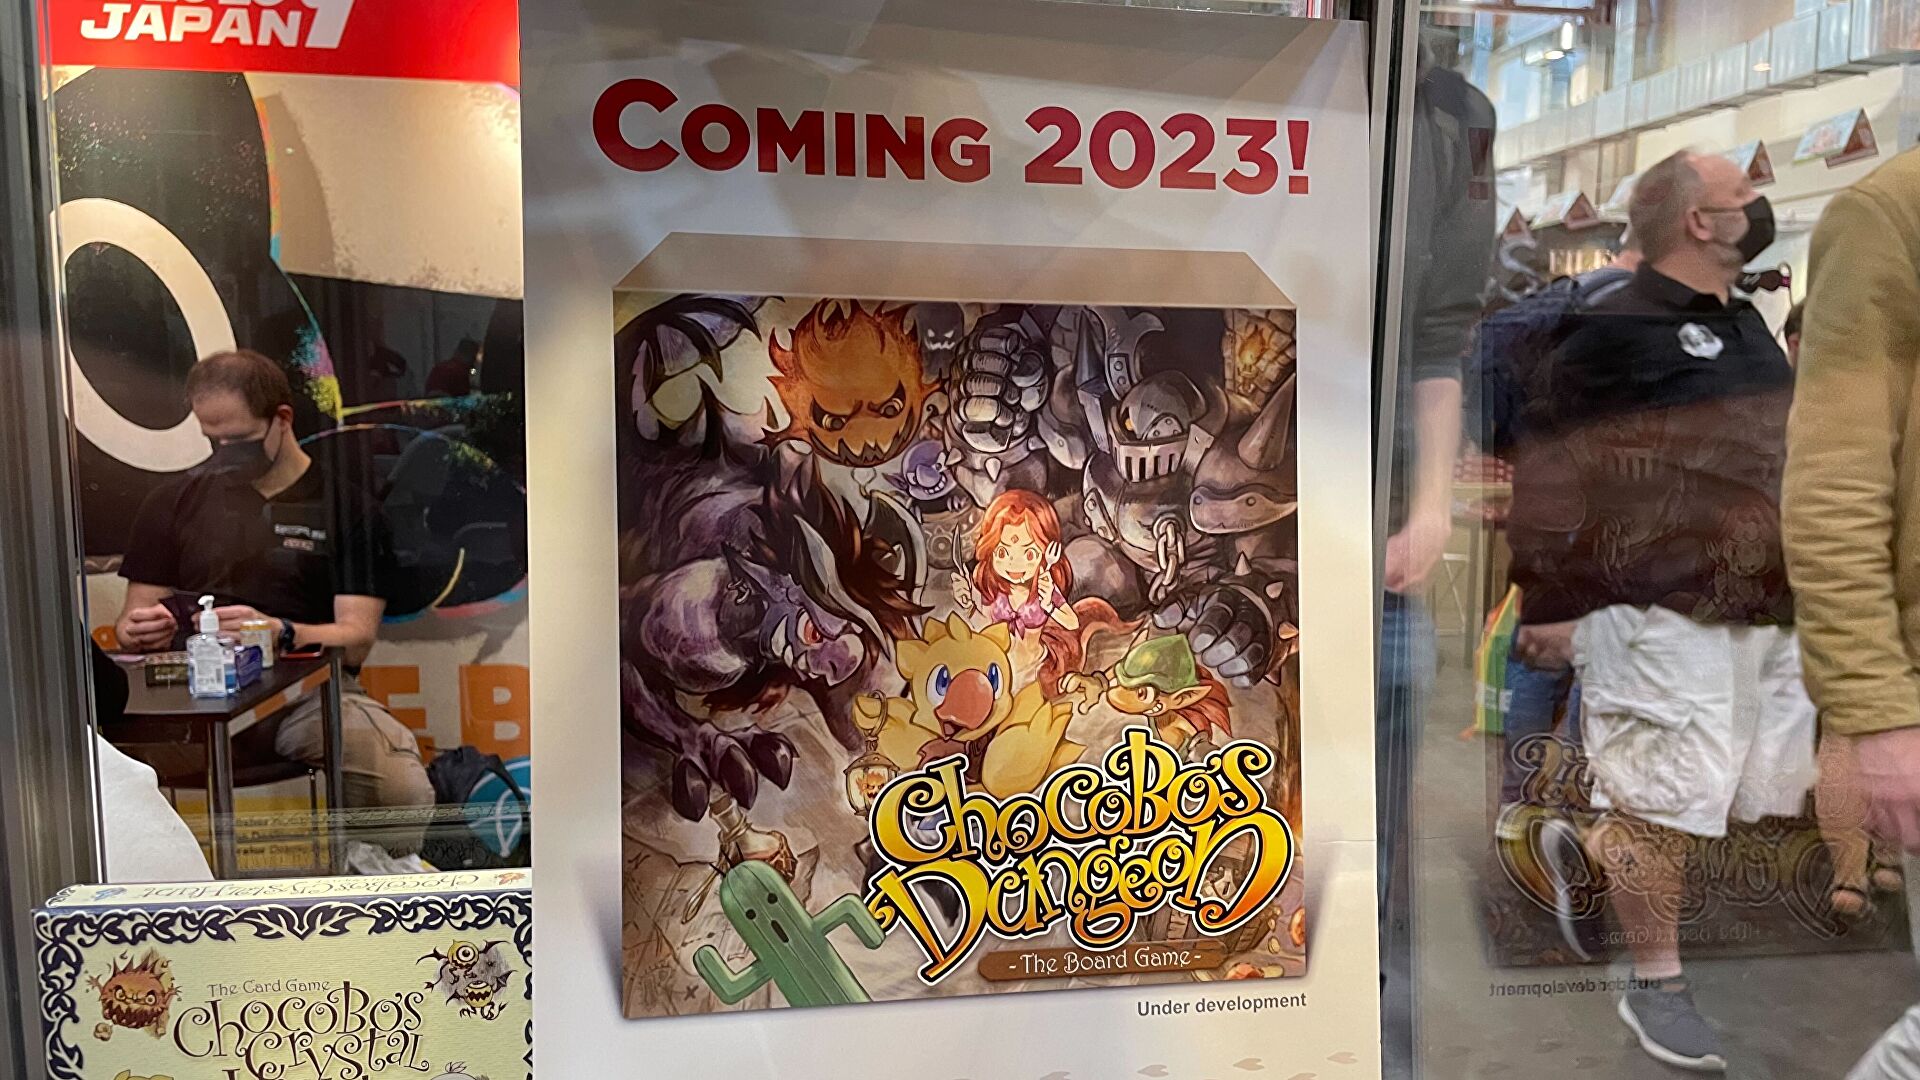 A sign advertising an in-development Chocobo Dungeon board game as seen at Essen Spiel.